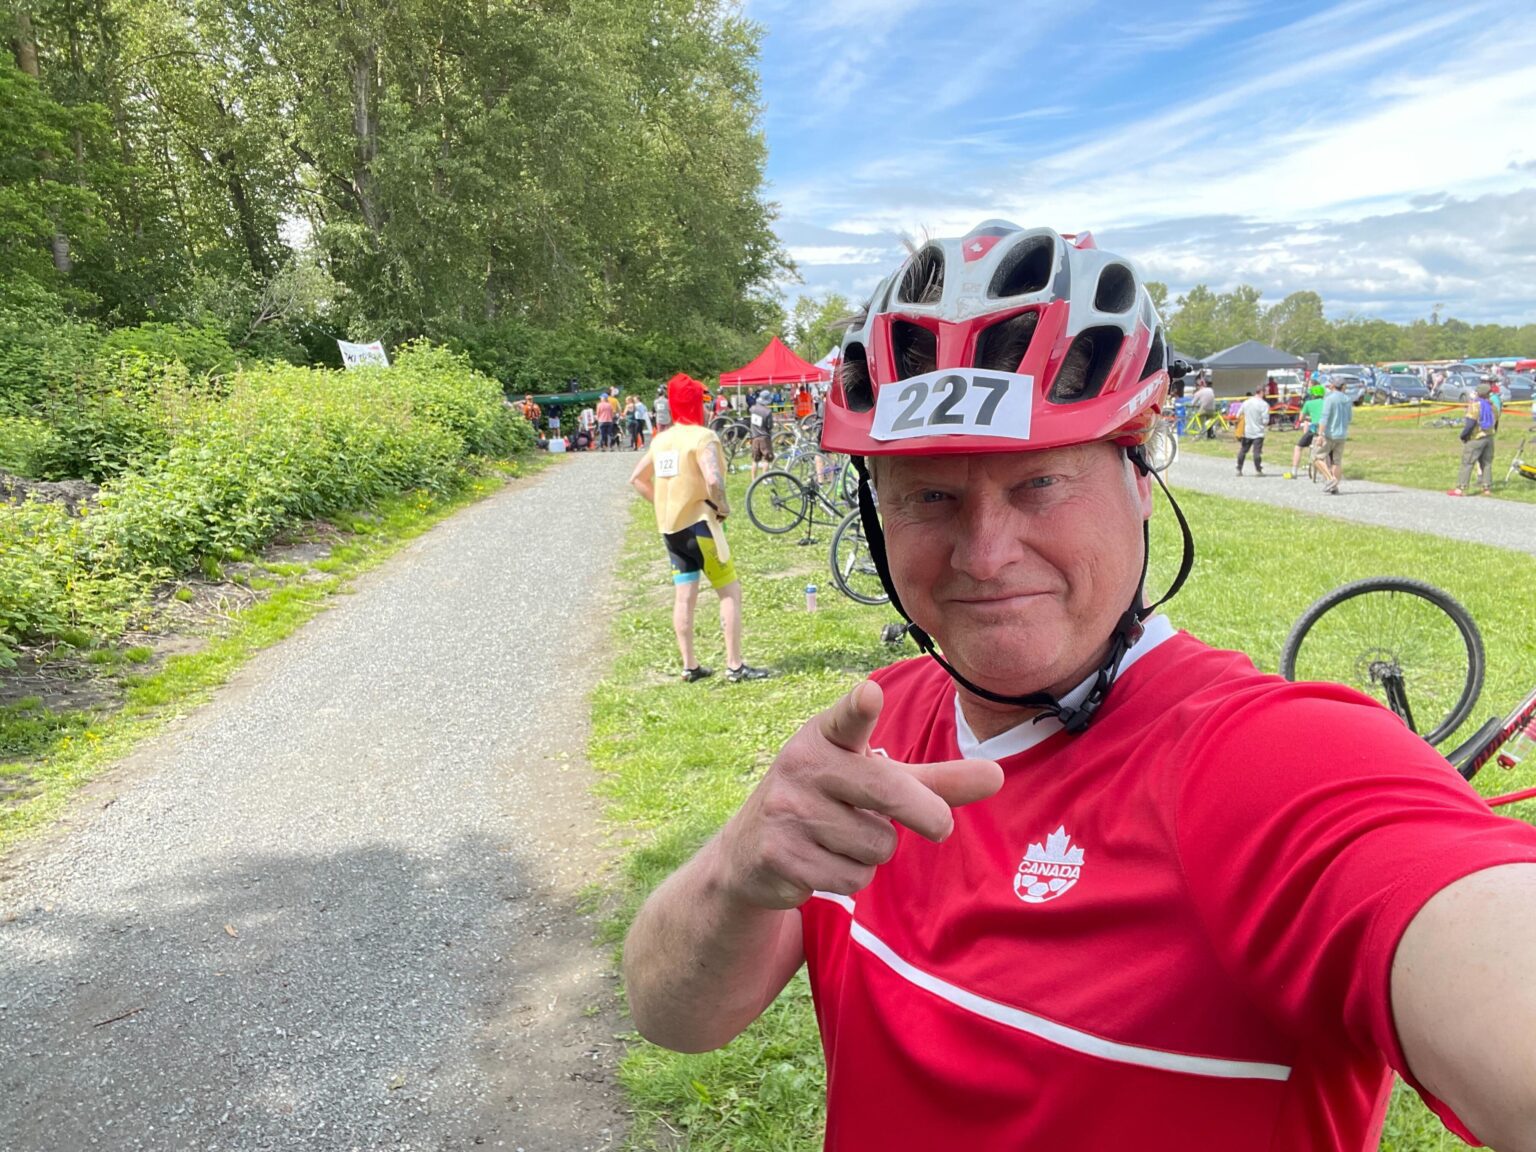 Rob Lawrance sent this selfie to his wife before embarking on the cyclocross leg of Sunday's Ski to Sea race. He died of a medical emergency while on the route. Lawrance has competed in multiple legs over the years